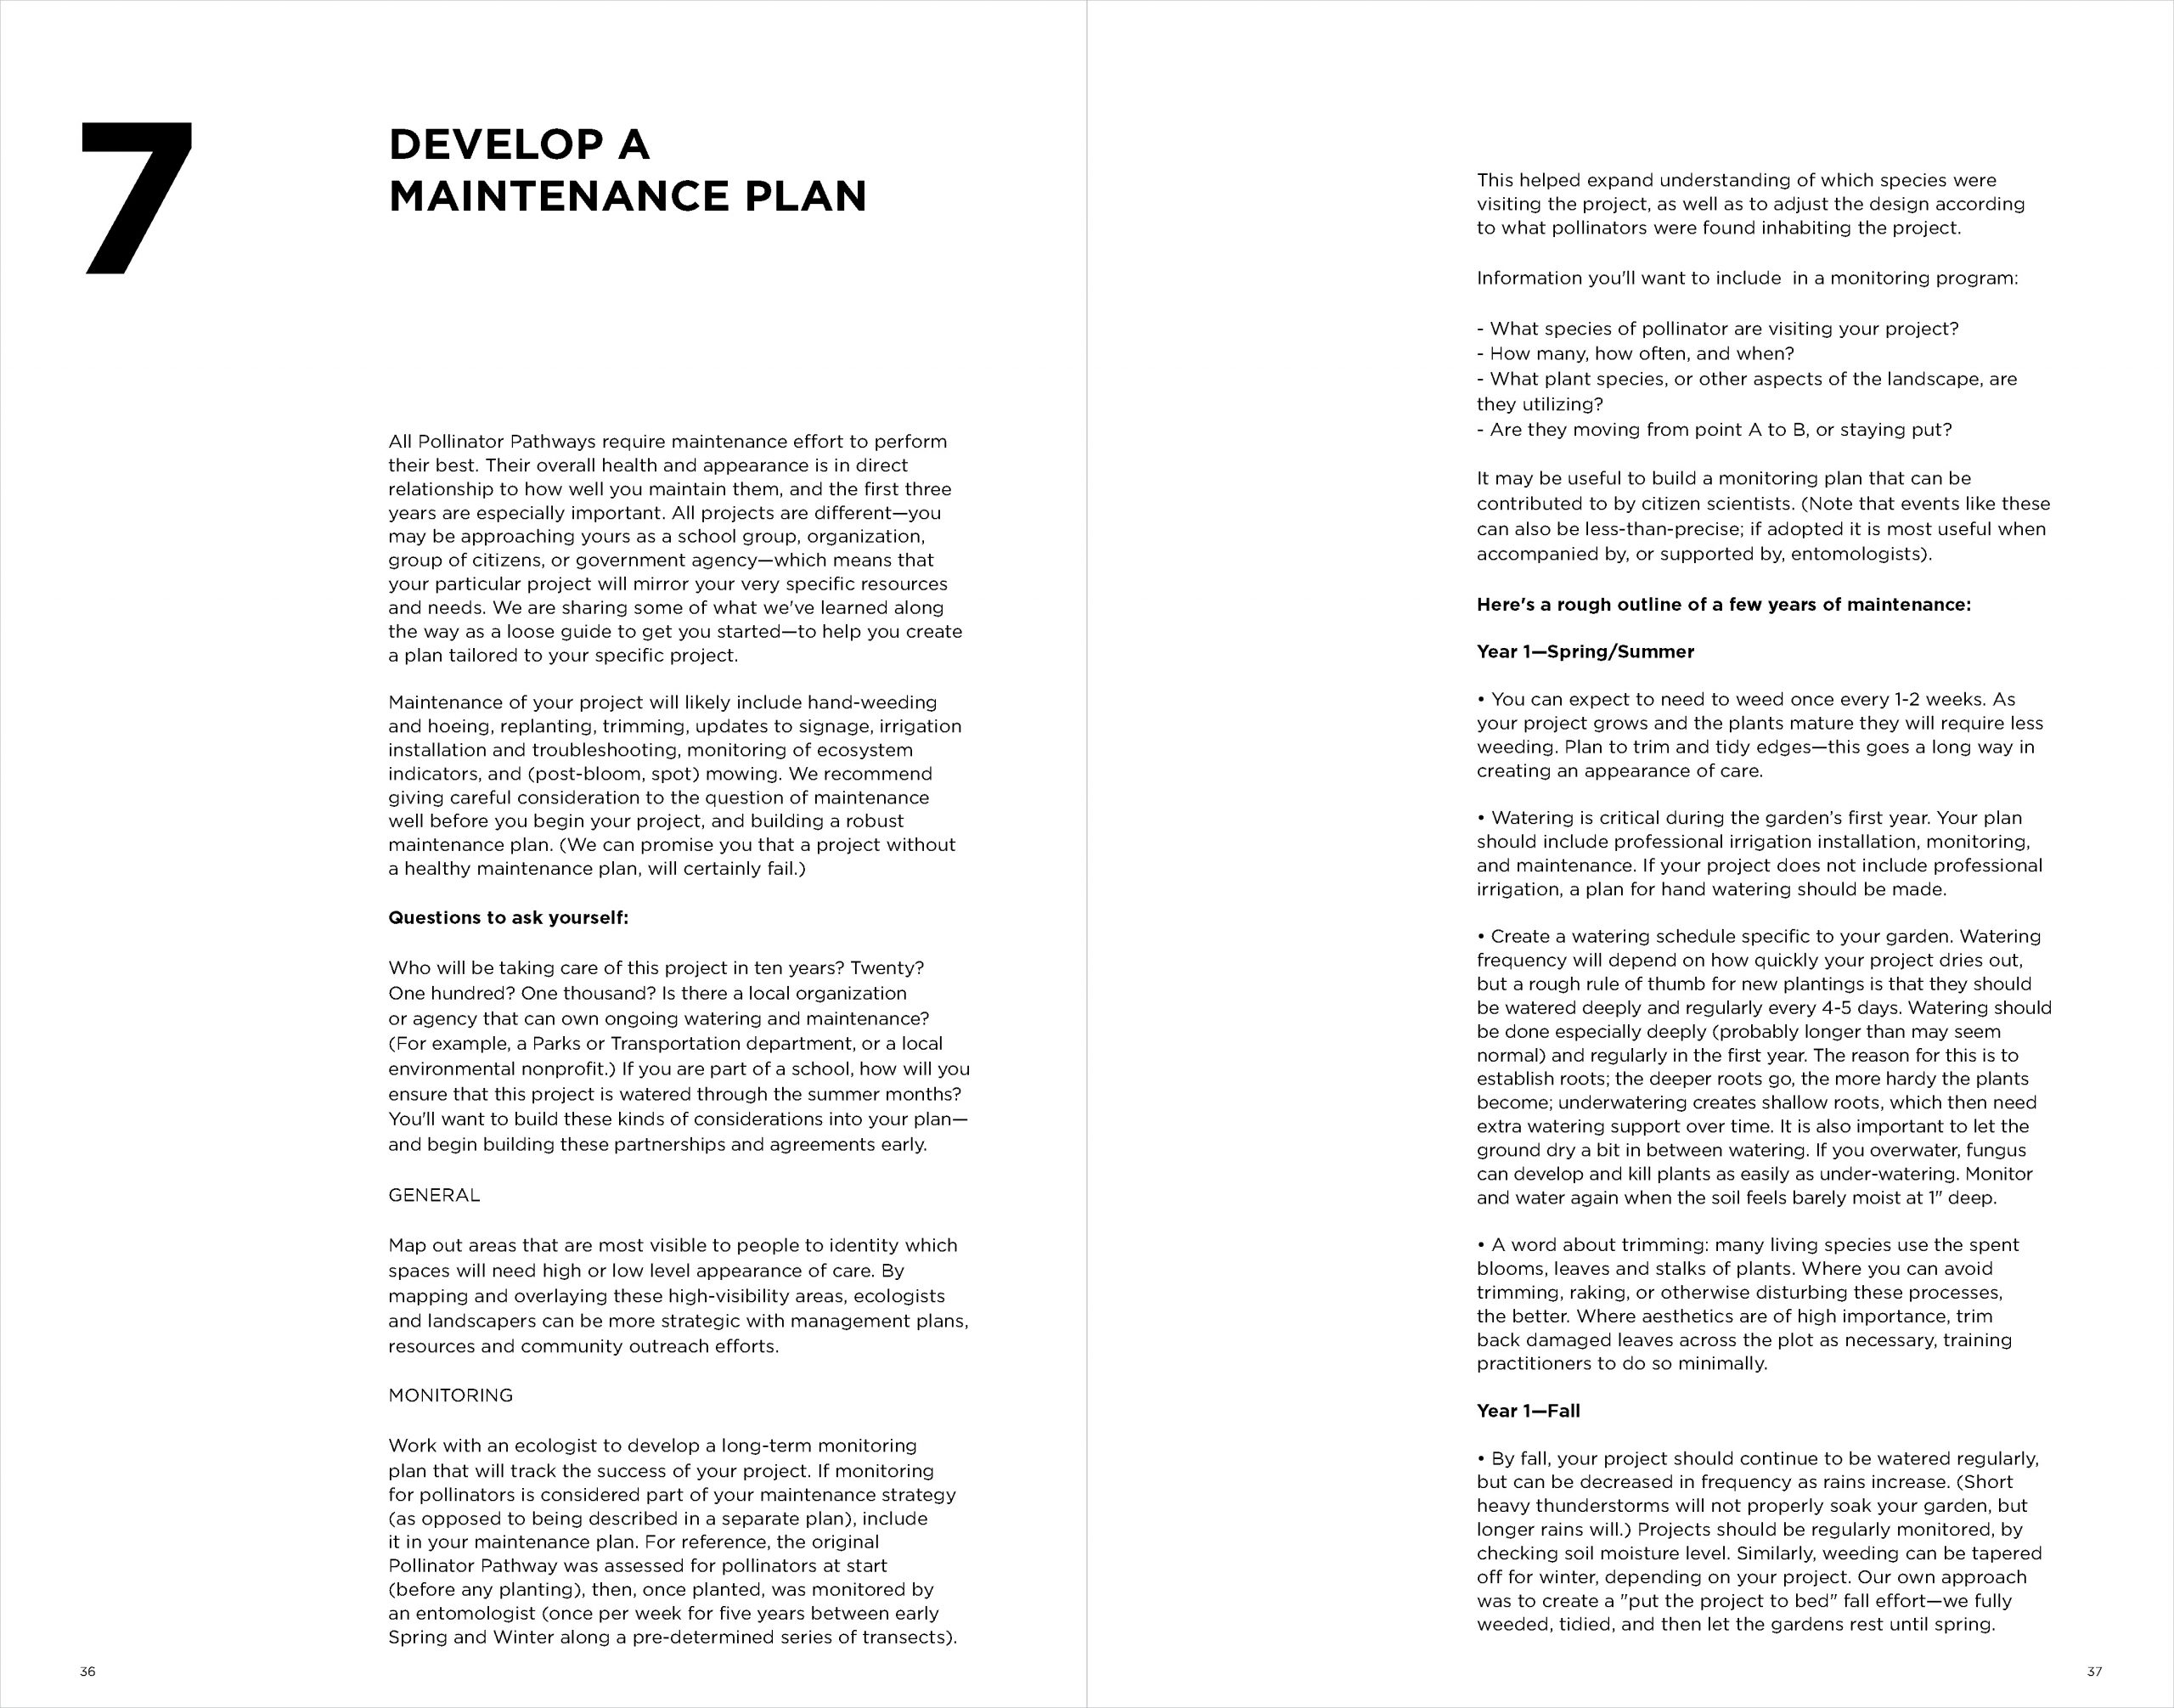 POLLINATOR-PATHWAY-TOOLKIT_Page_21